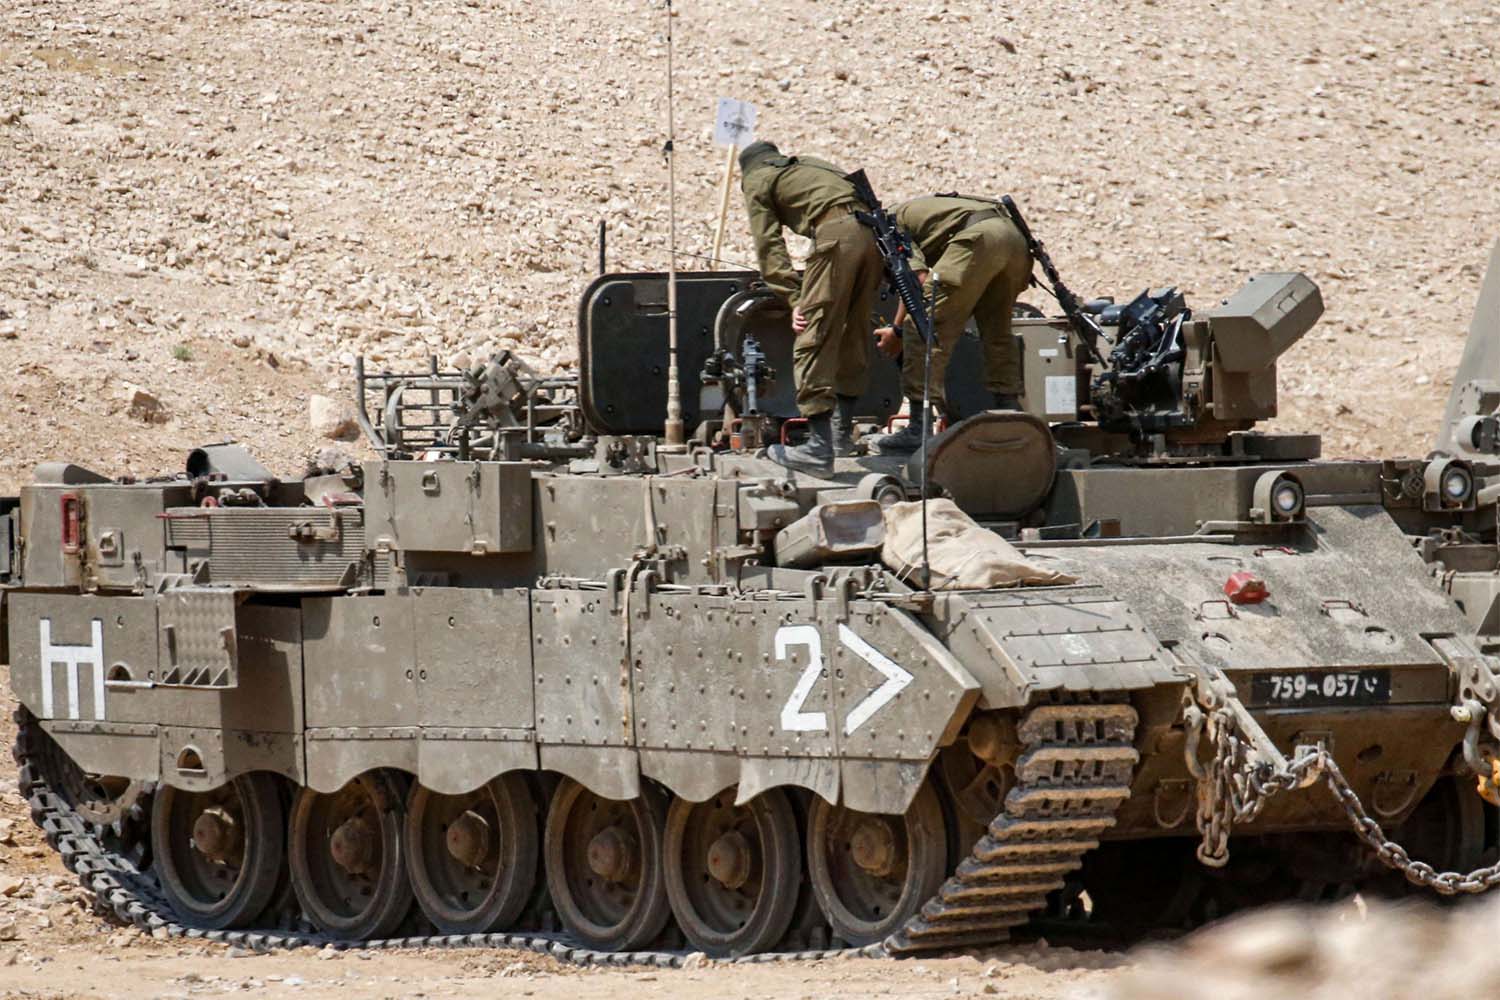 Israeli soldiers standing atop an infantry fighting vehicle (IFV) check their equipment at a military training camp near the village of Yatta 